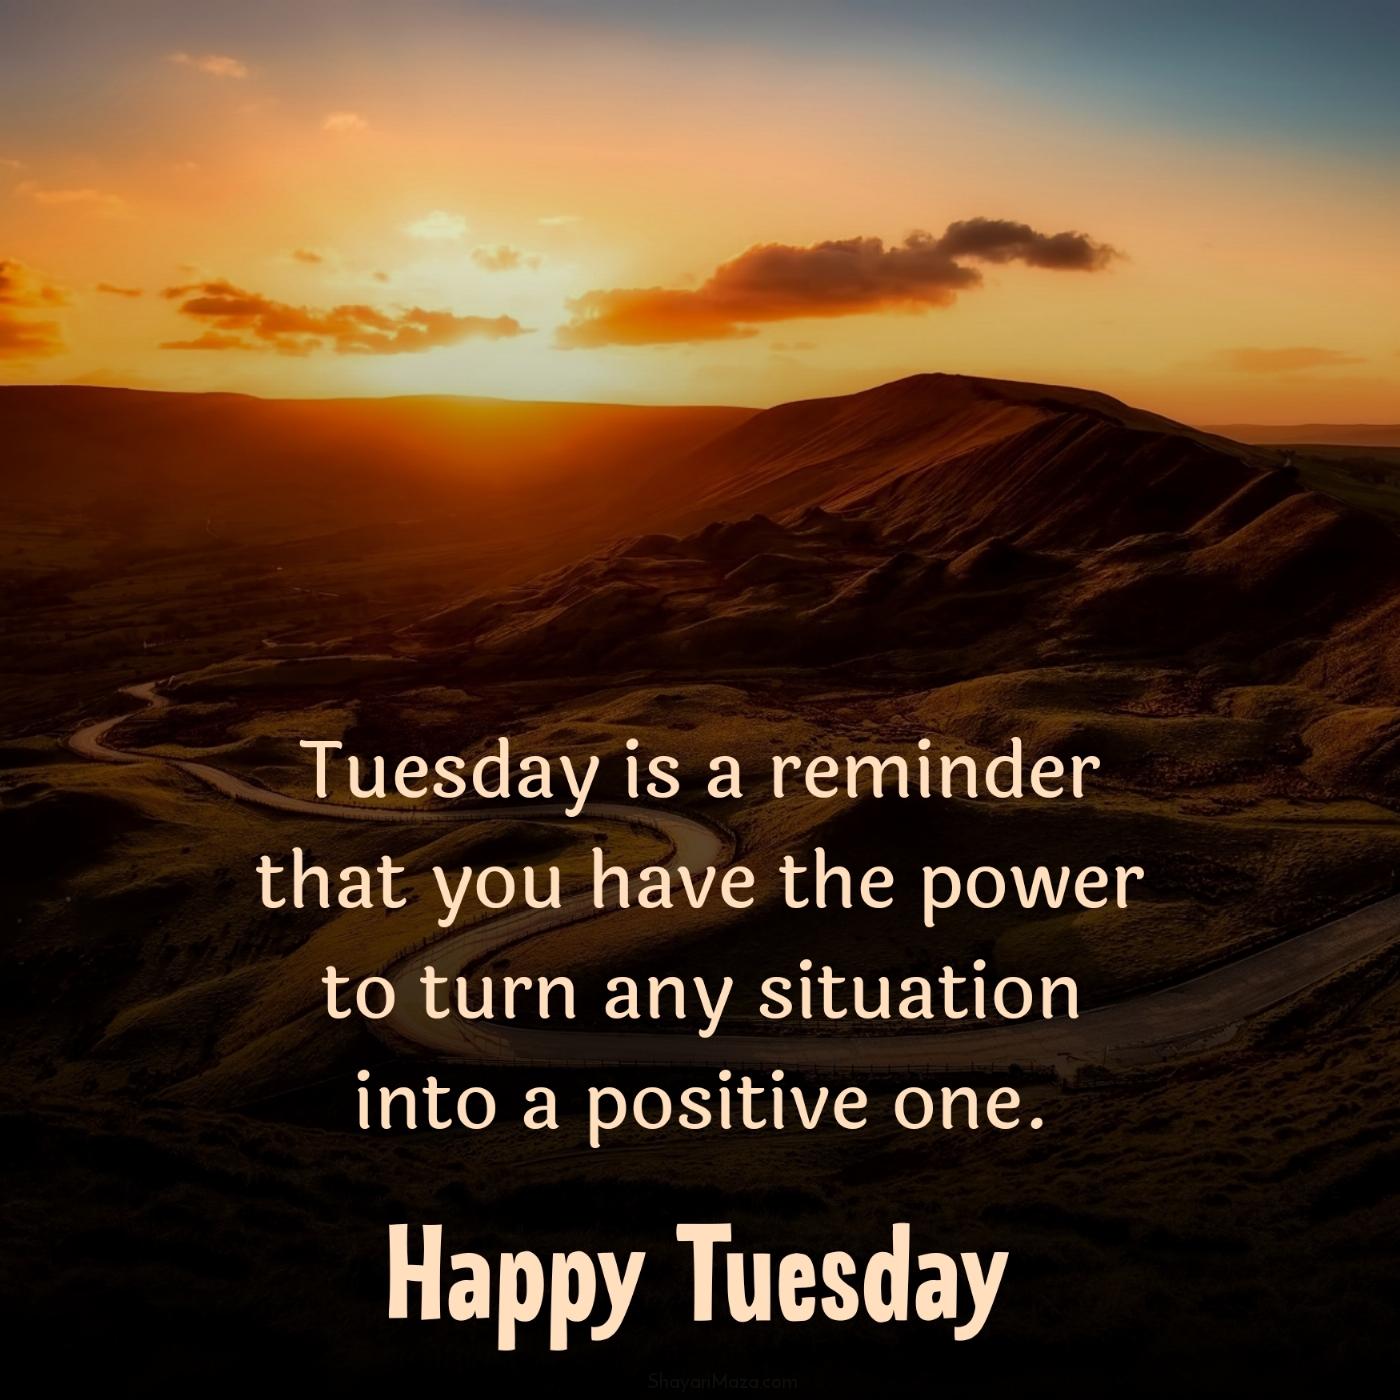 Tuesday is a reminder that you have the power to turn any situation